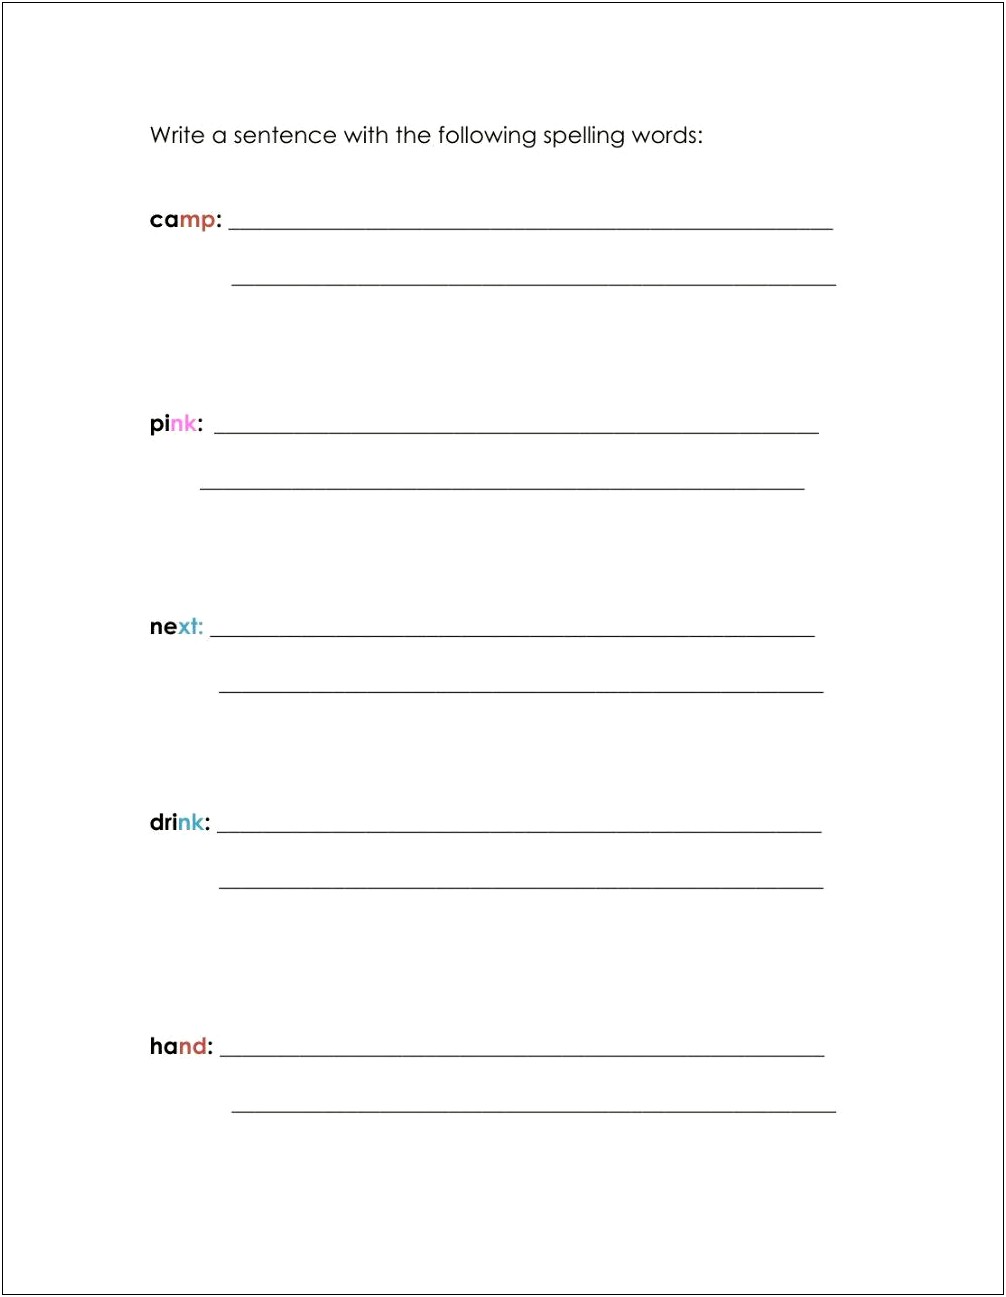 Sentence Writing Template For Spelling Words